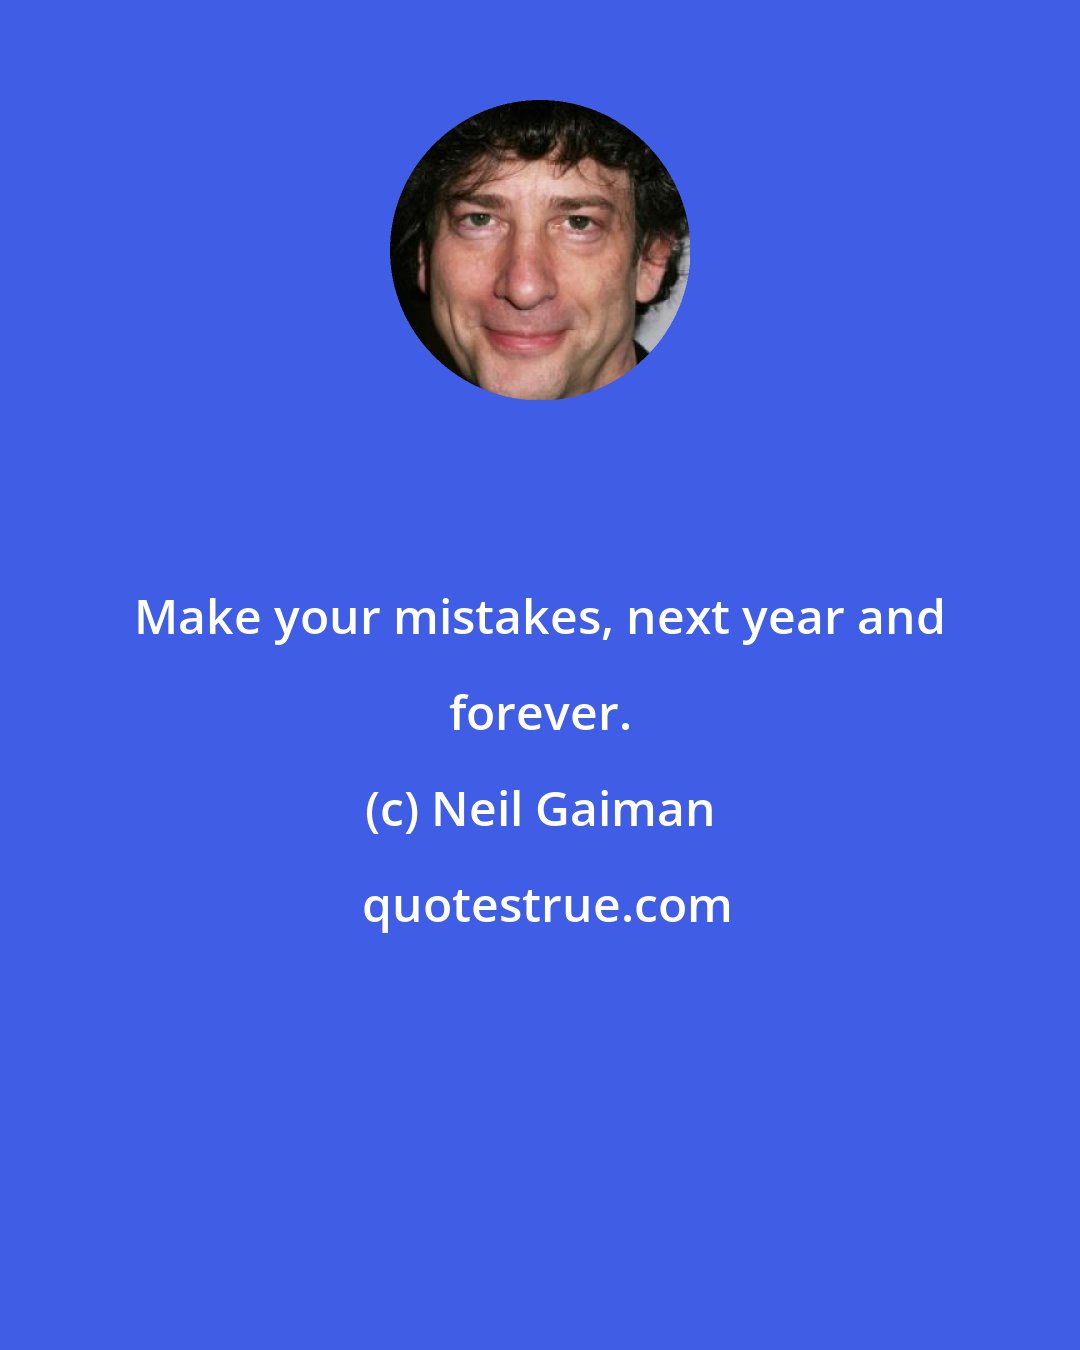 Neil Gaiman: Make your mistakes, next year and forever.